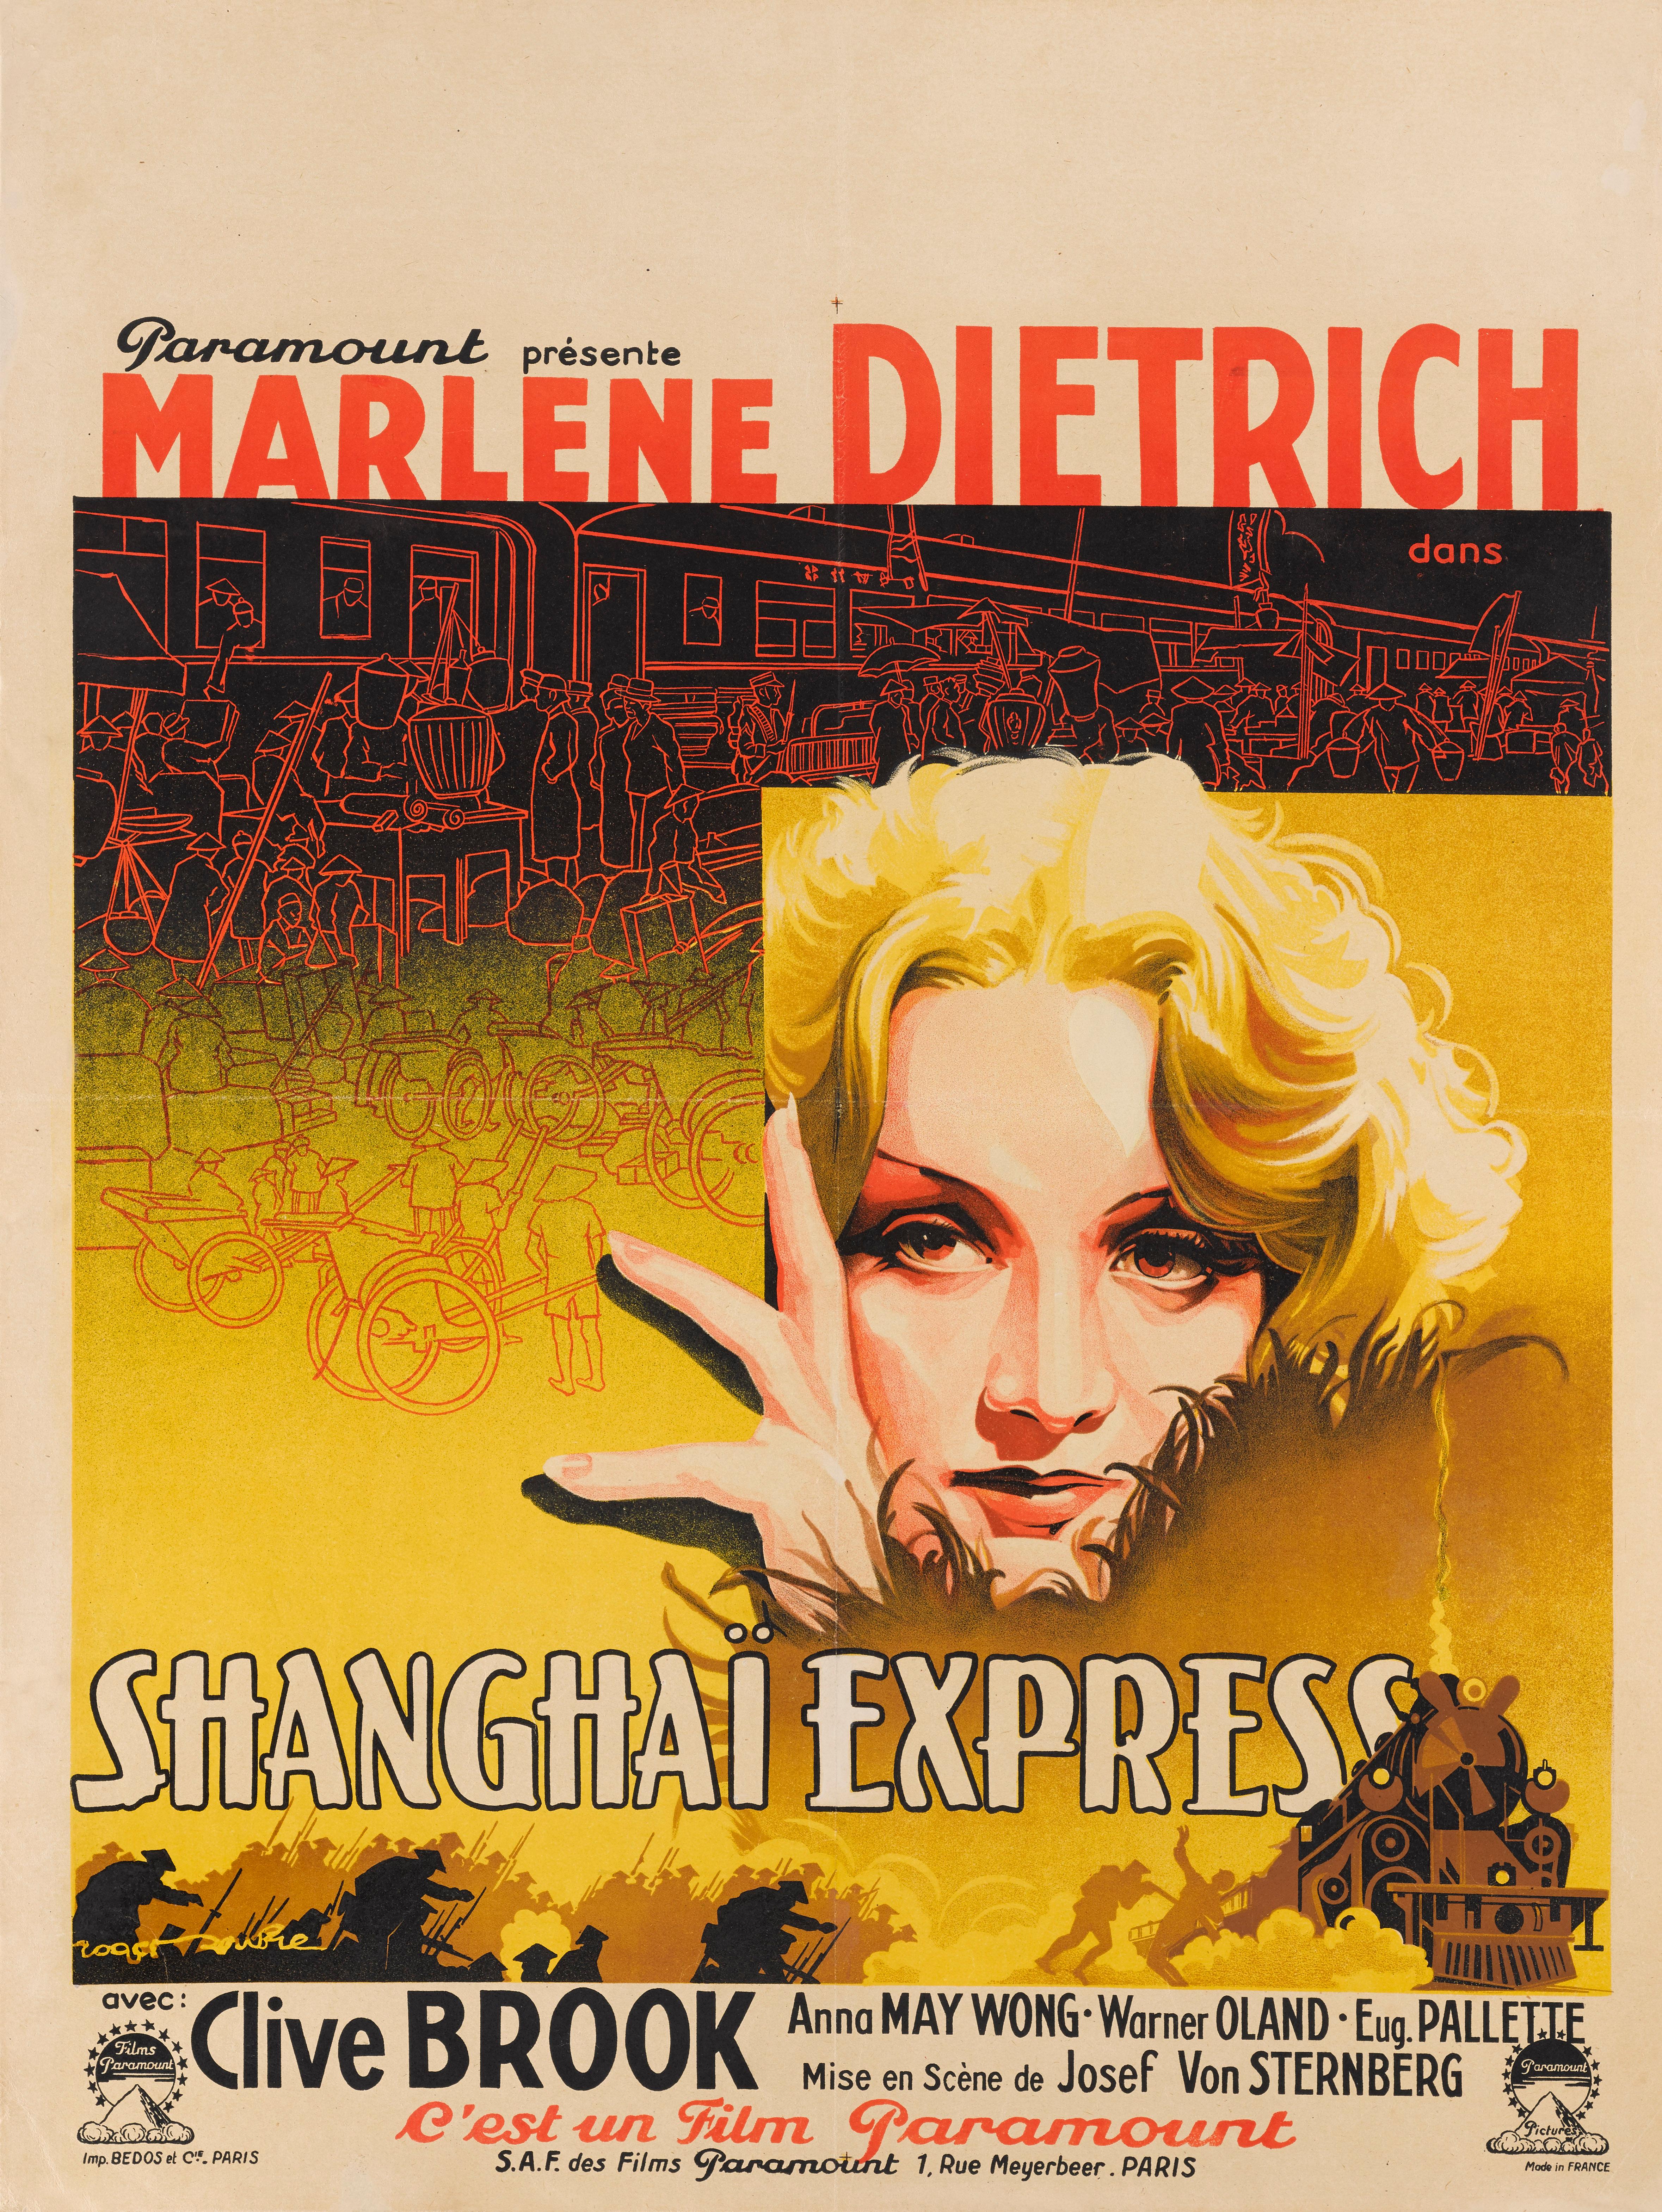 Framed Original French film poster for Shanghai Express, 1932.
This fantastically atmospheric melodrama is the third collaboration between director Josef von Sternberg and Marlene Dietrich. In a few years their careers would diverge, but between